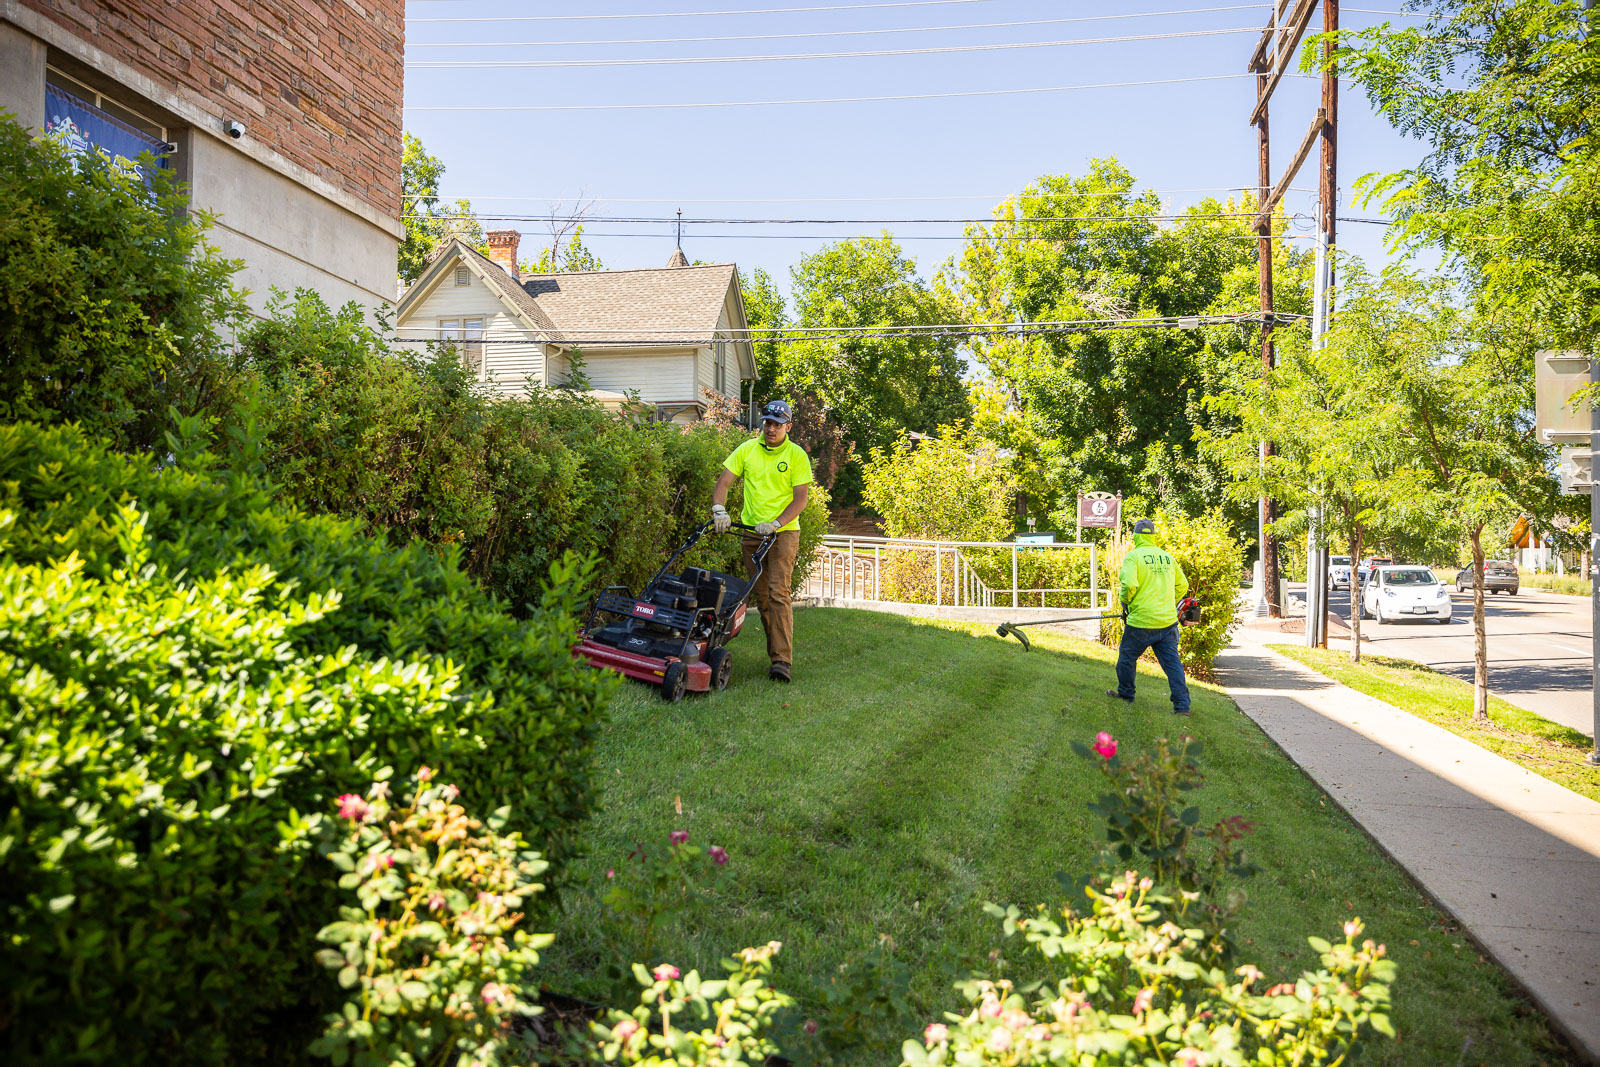 commercial property maintenance crew mowing lawn 